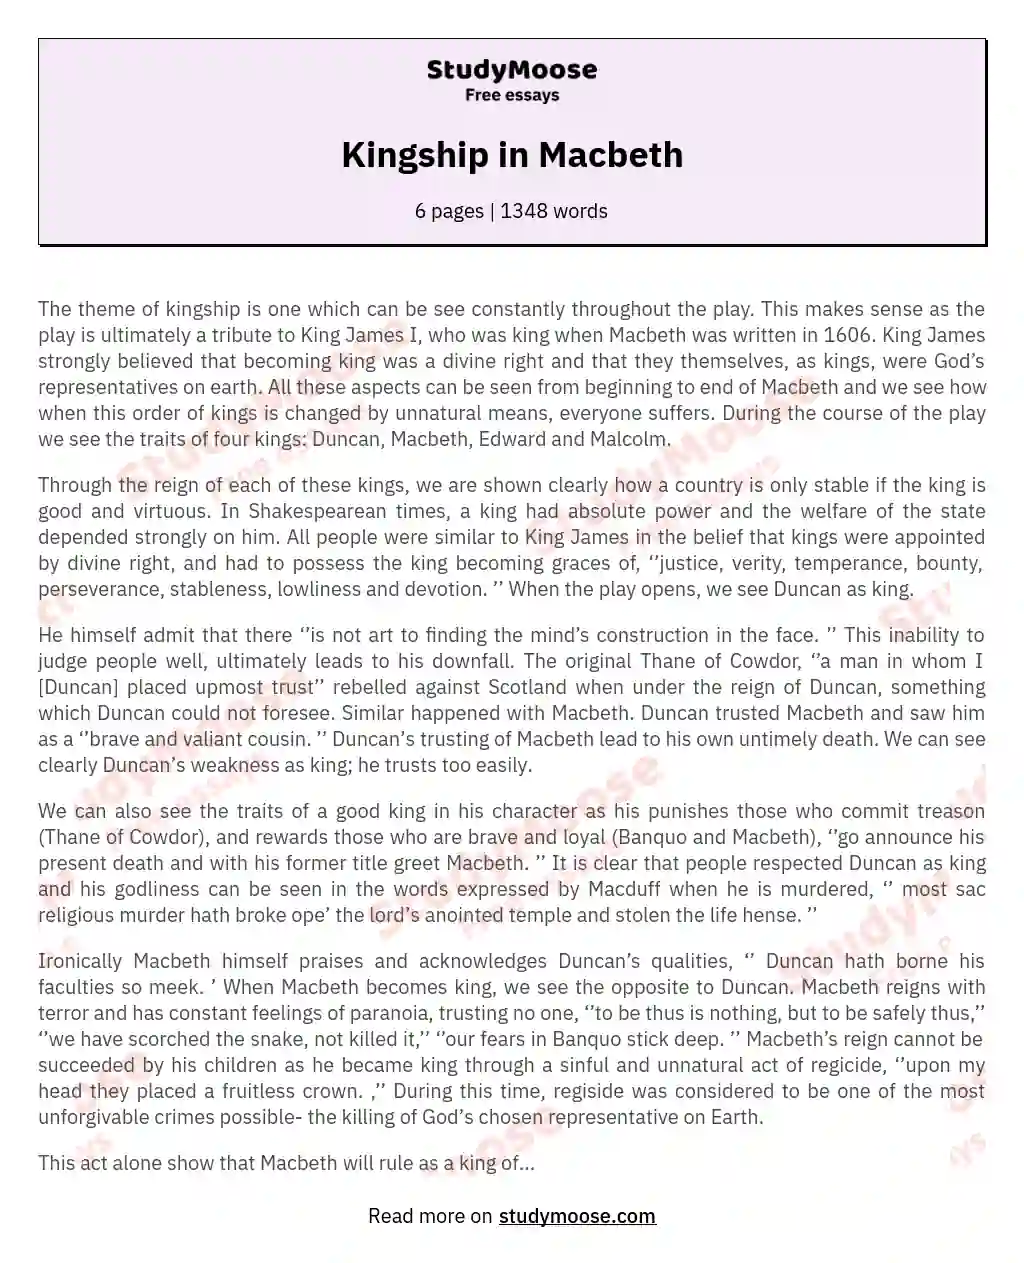 Virtue, Trust, and Chaos in Macbeth's Kingdoms essay